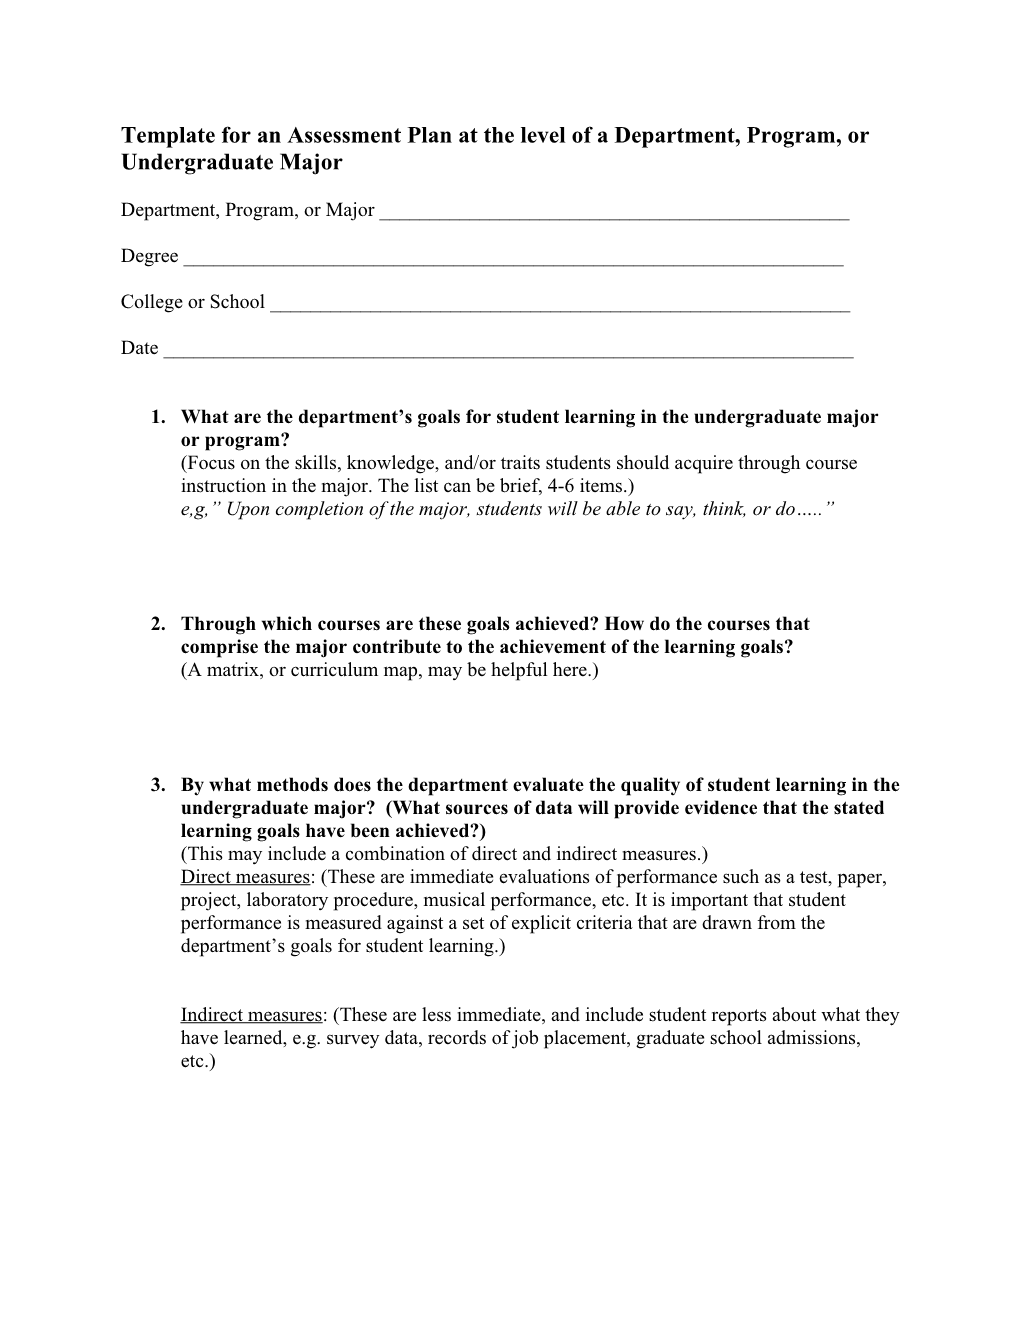 Template for an Assessment Plan at the Level of a Department, Program, Or Undergraduate Major